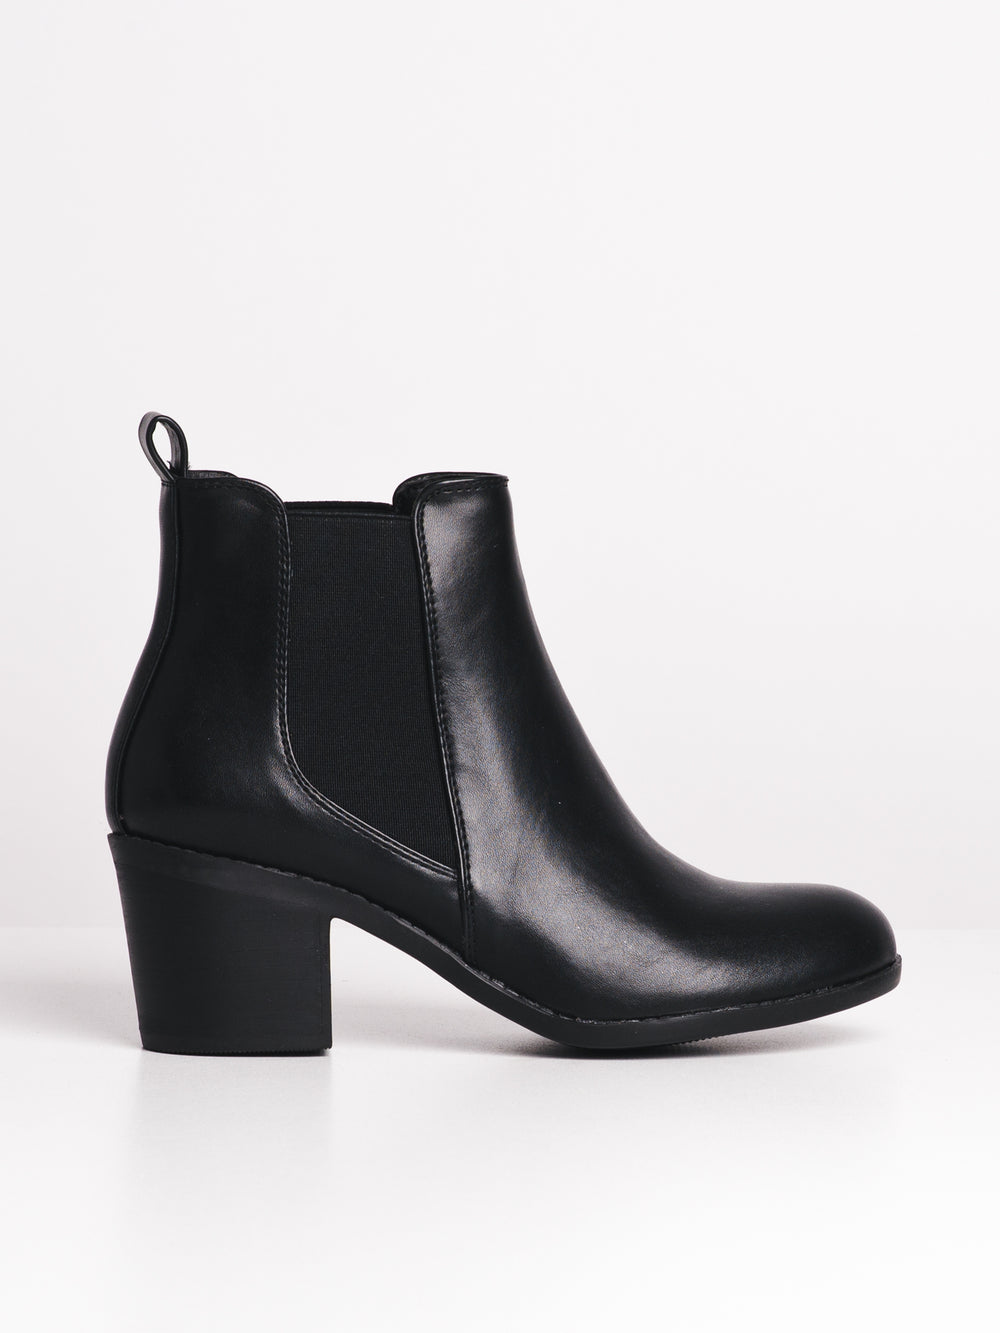 WOMENS CLAIRE - BLACK-D4 - CLEARANCE